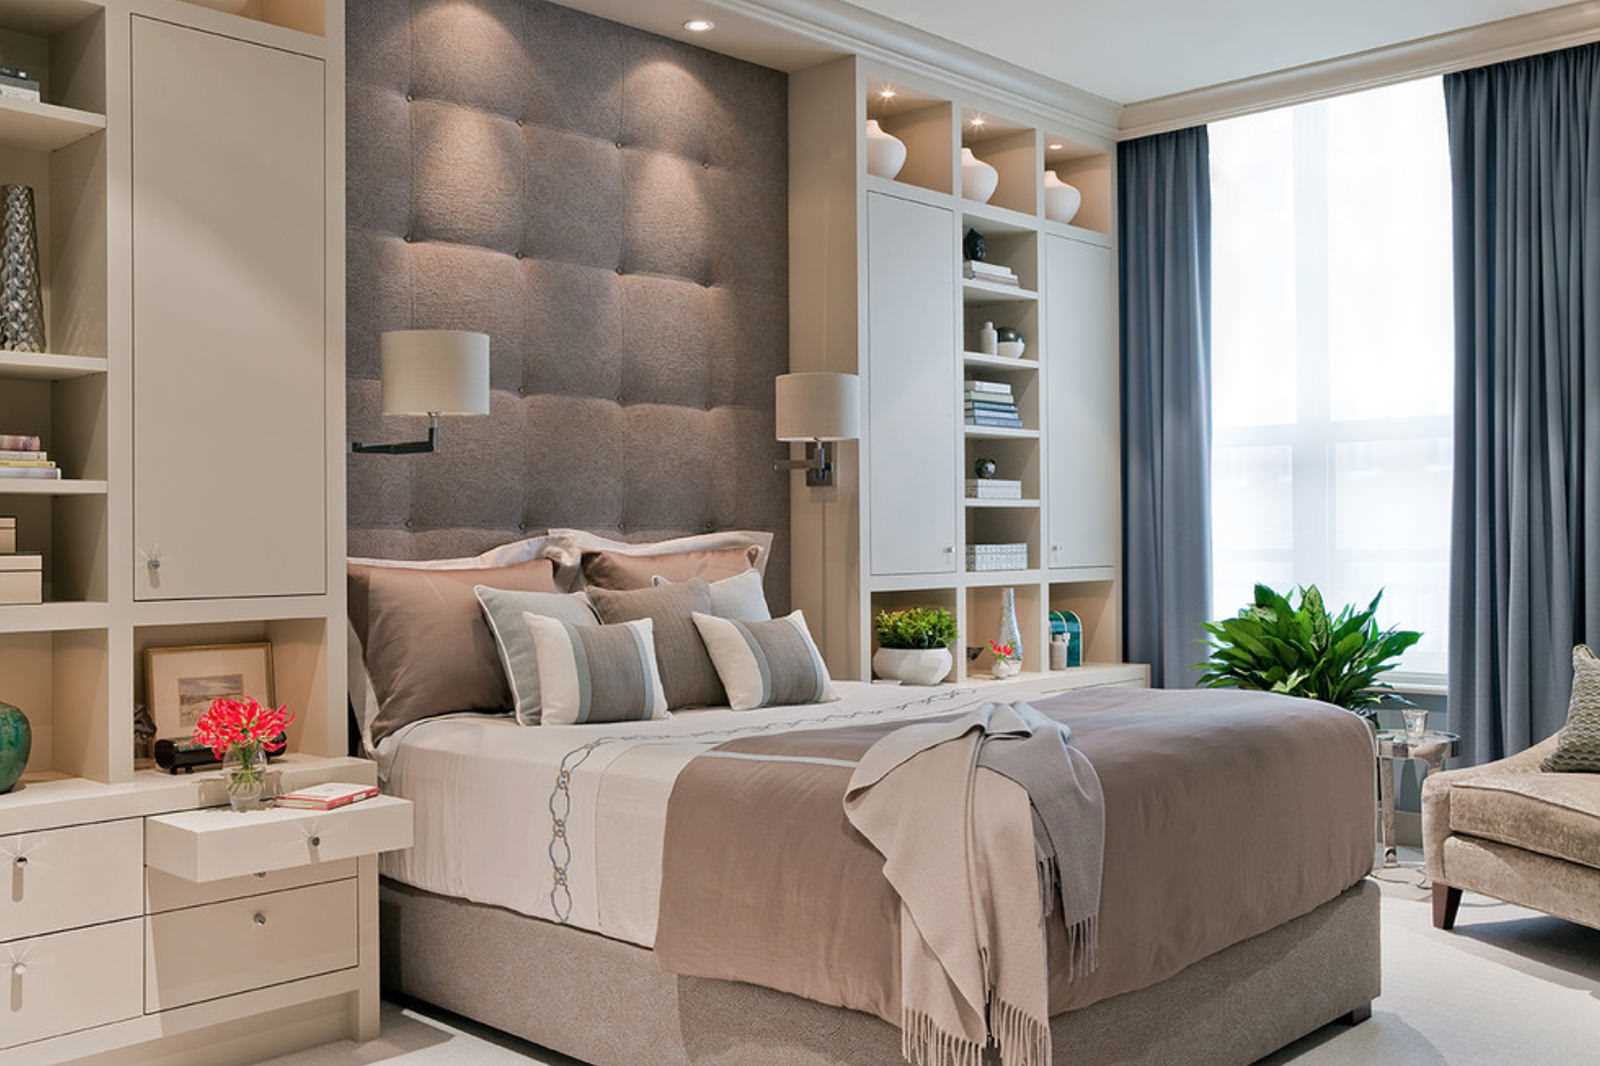 variant of an interesting combination of beige color in the style of the room